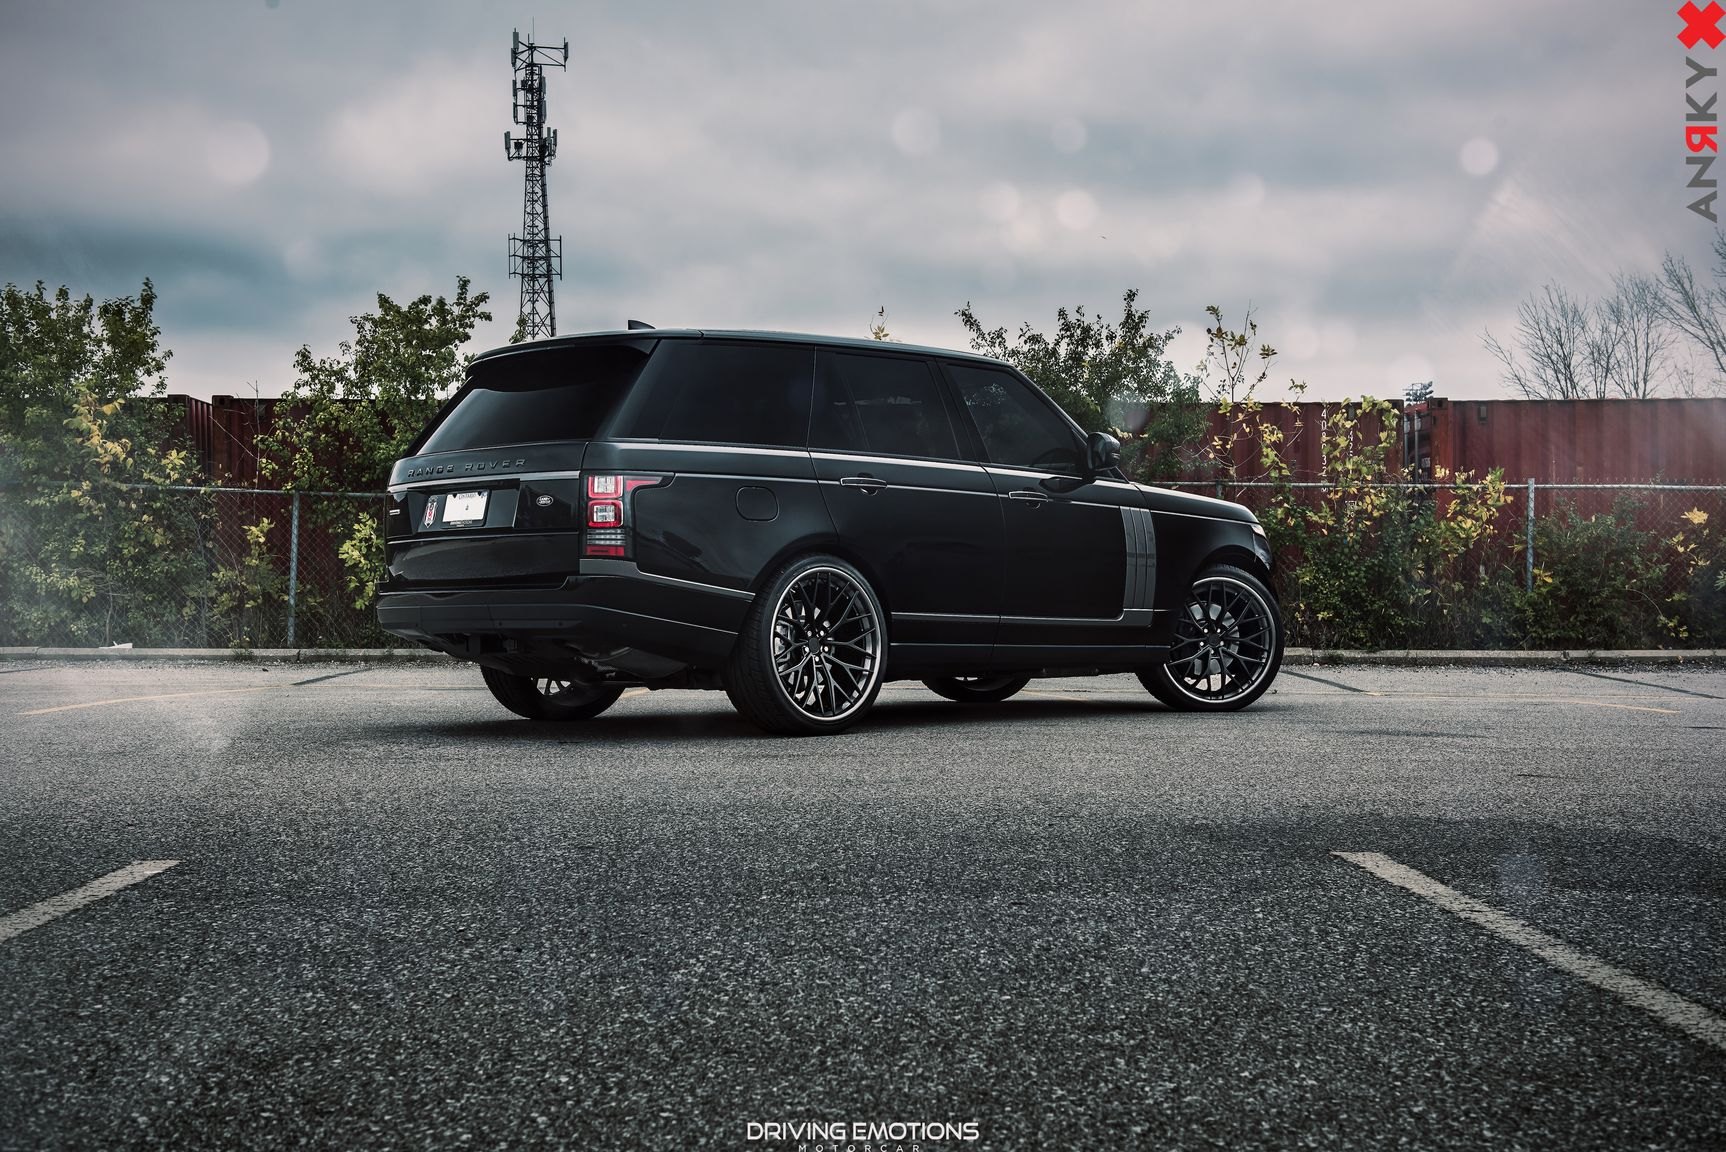 Black Range Rover with Aftermarket LED Taillights - Photo by Anrky Wheels